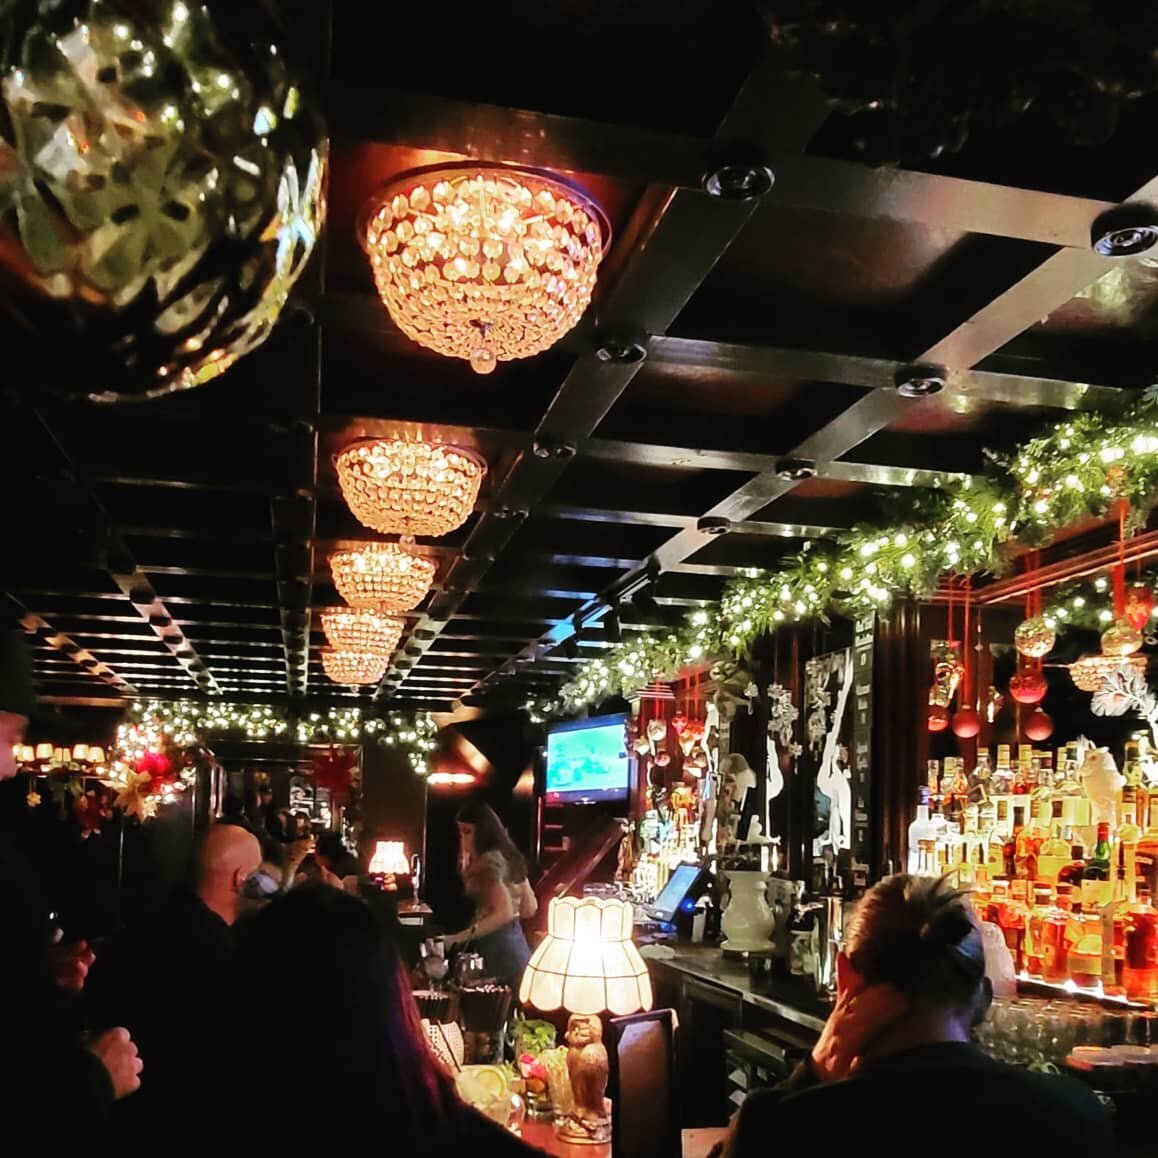 Hootie hoo! We are back! #reopen #finally #comevisit 
.
.
.
#owltree #unionsquare #unionsquarebars #nobhill #nobhillbars #cocktailtime #SF #SFbars #cocktails #beer #wine #holidayparty #holidaypartytime #christmas #christmasparty #christmastime